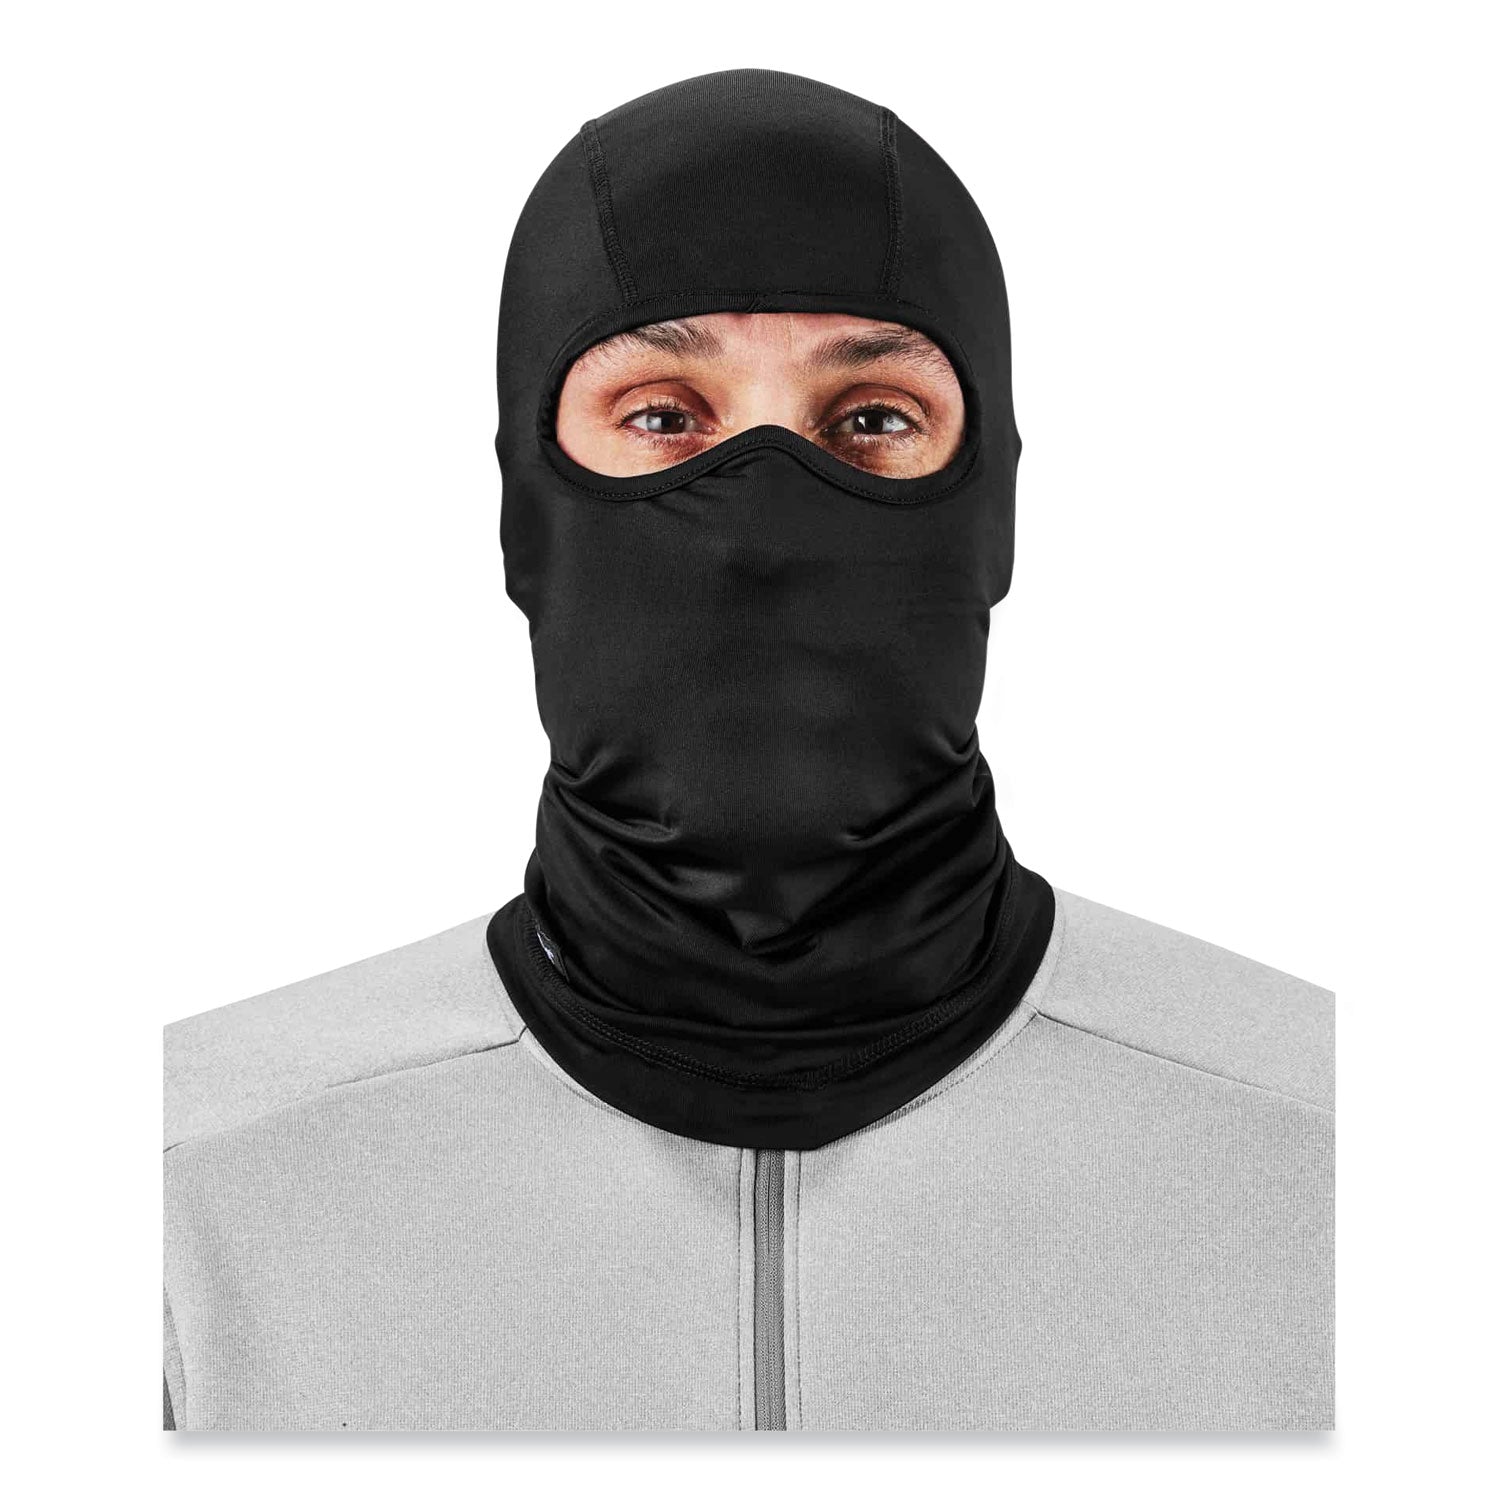 n-ferno-6832-spandex-balaclava-face-mask-one-size-fits-most-black-ships-in-1-3-business-days_ego16832 - 2